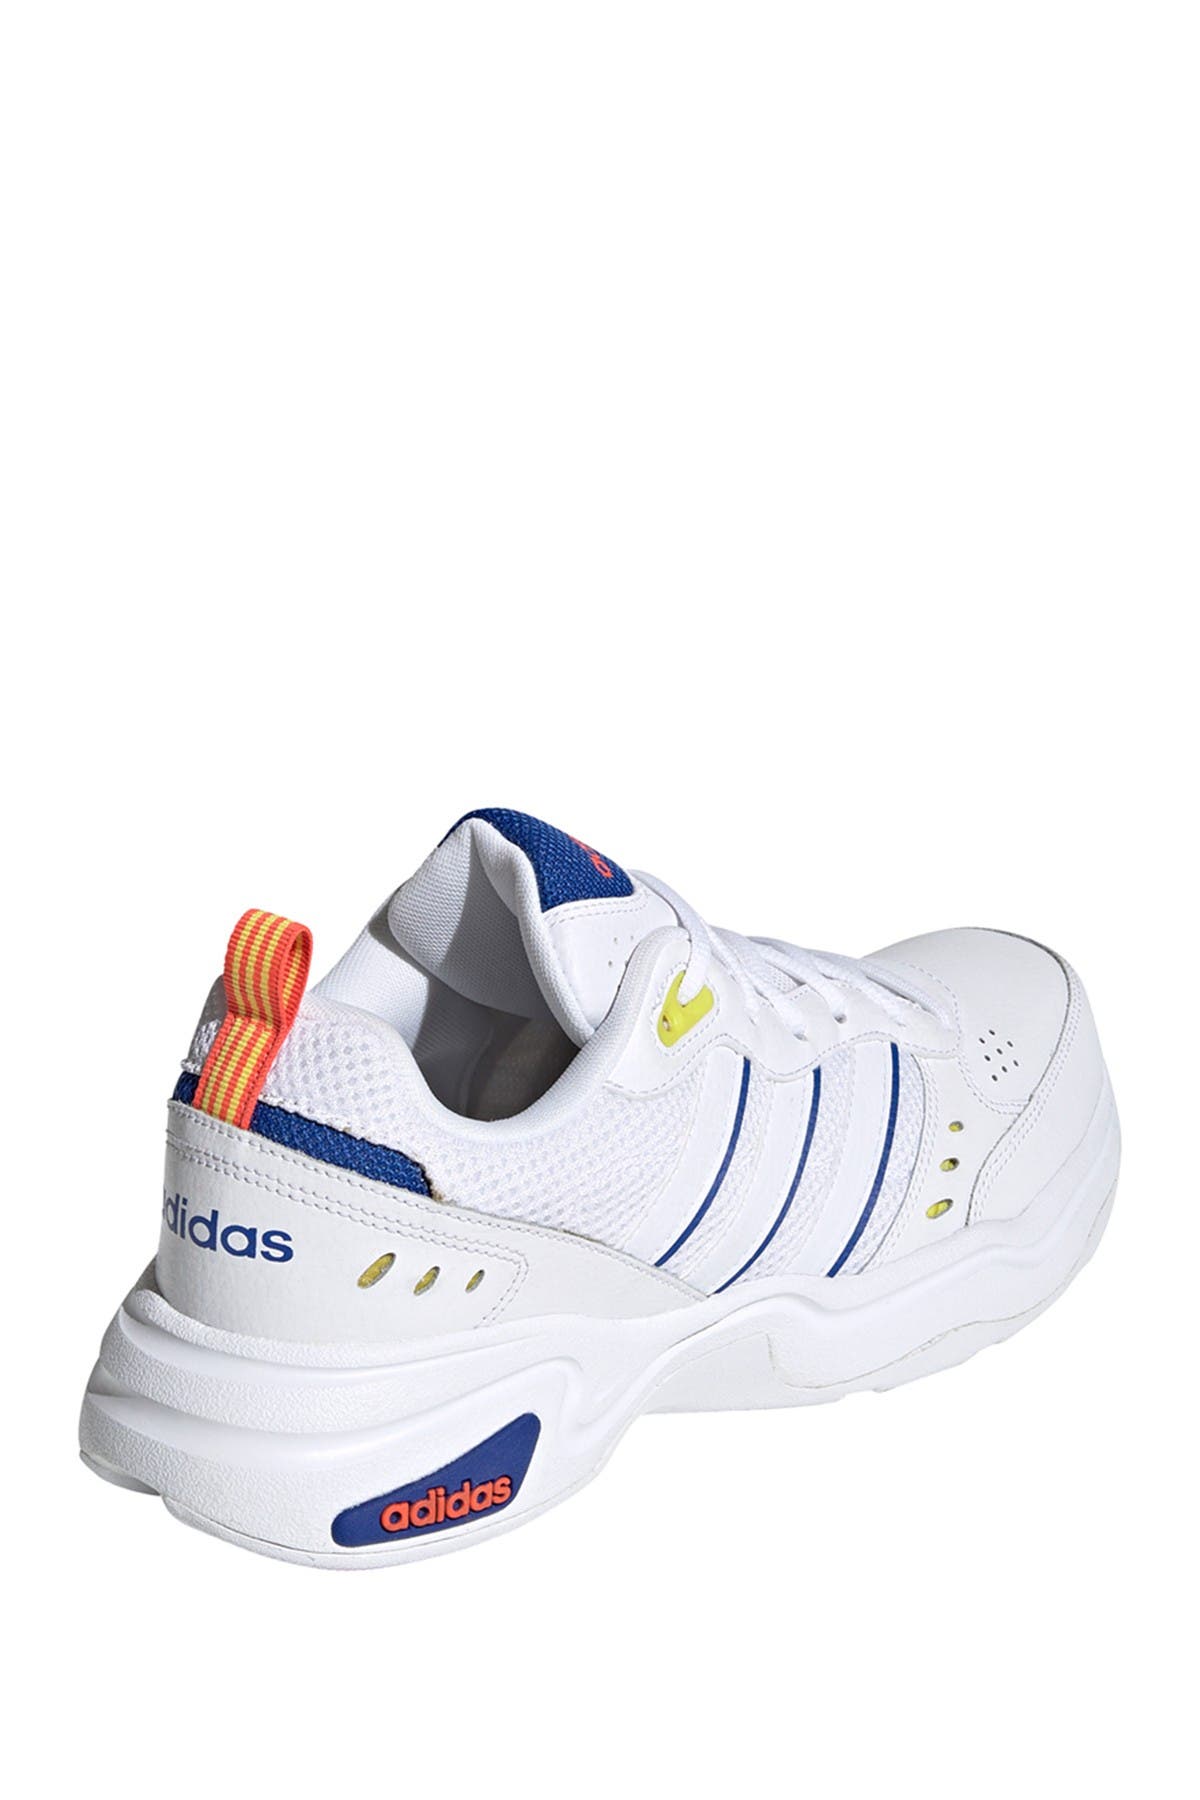 most comfortable adidas shoes 219